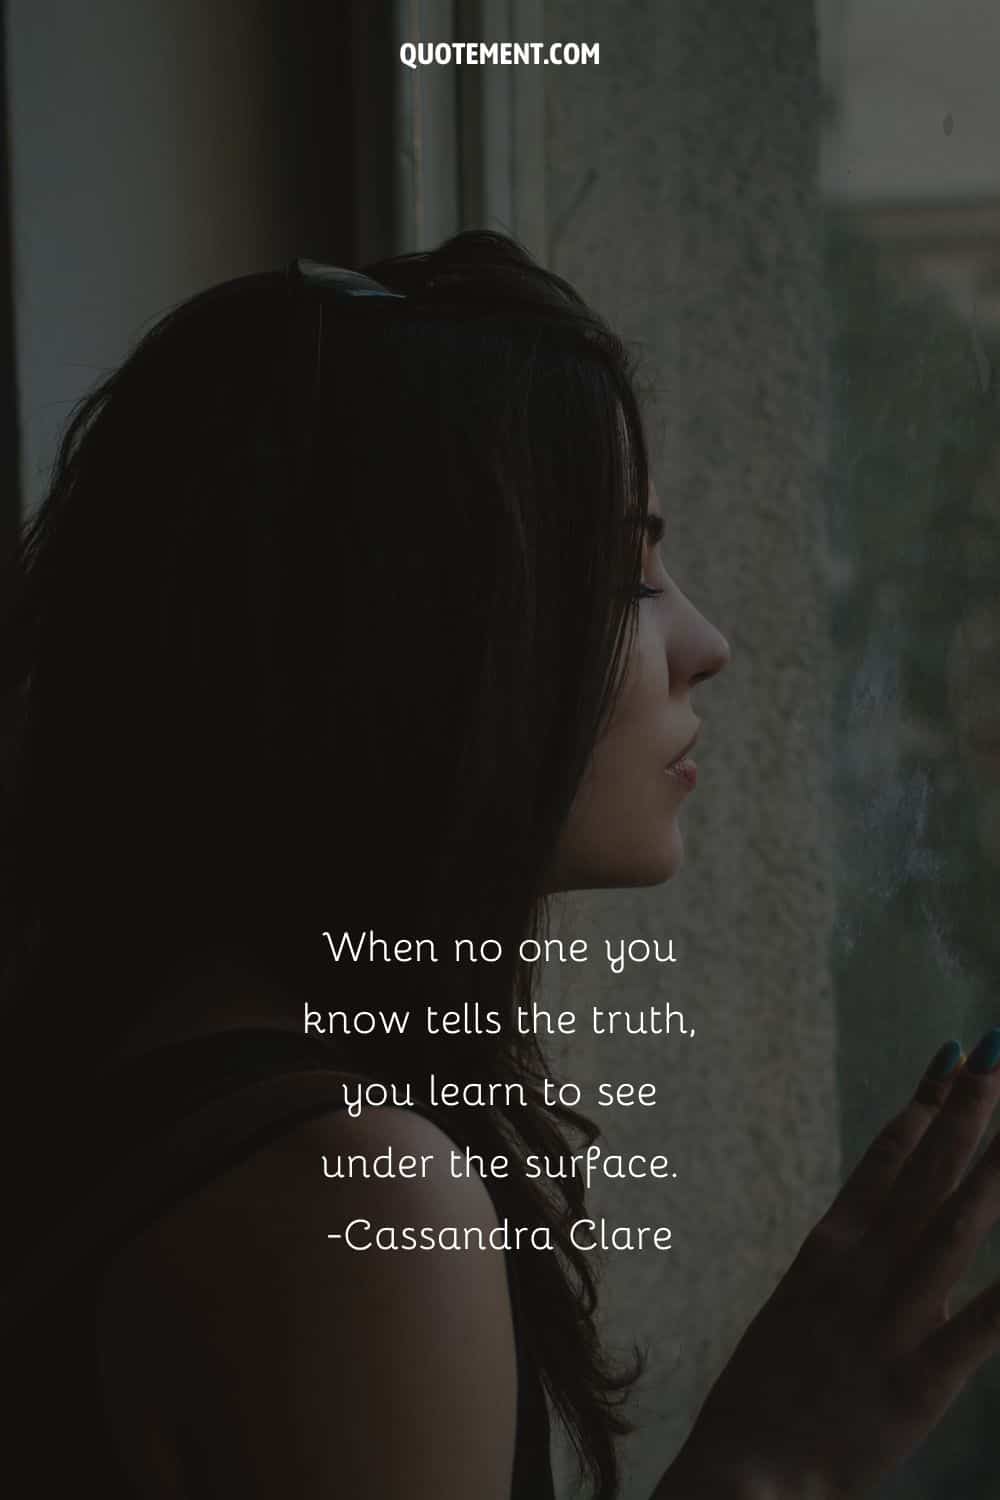 When no one you know tells the truth, you learn to see under the surface